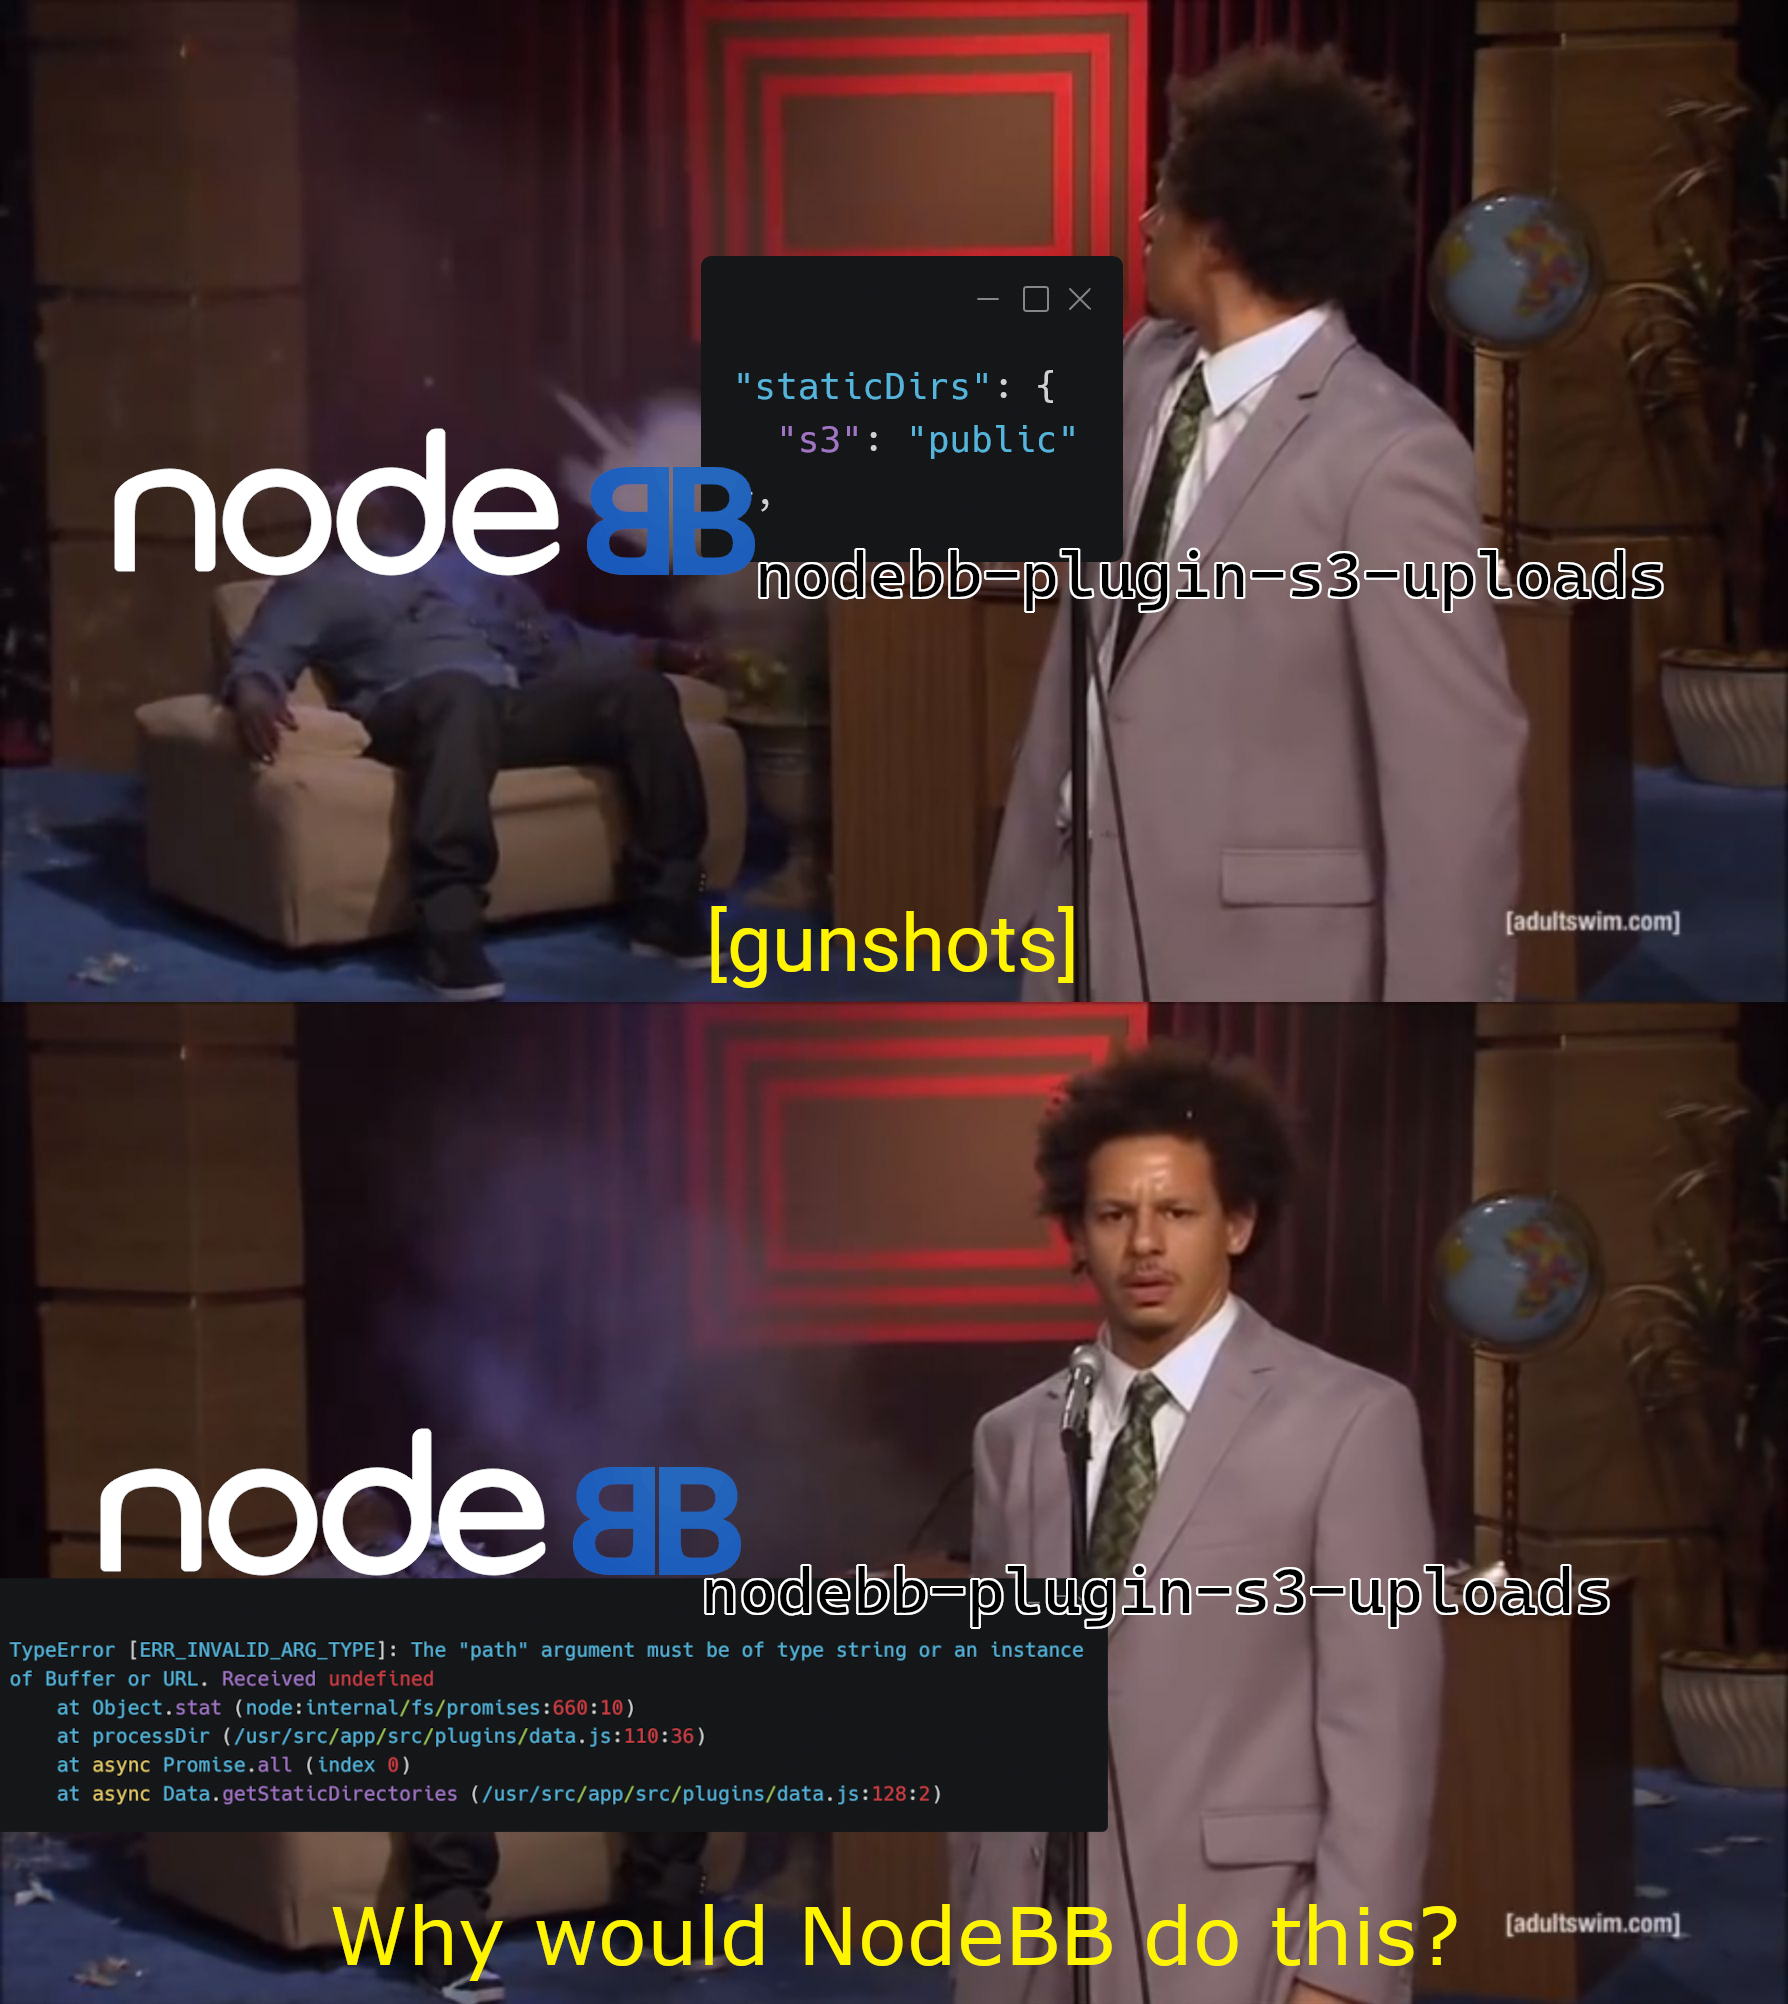 why would nodebb do this